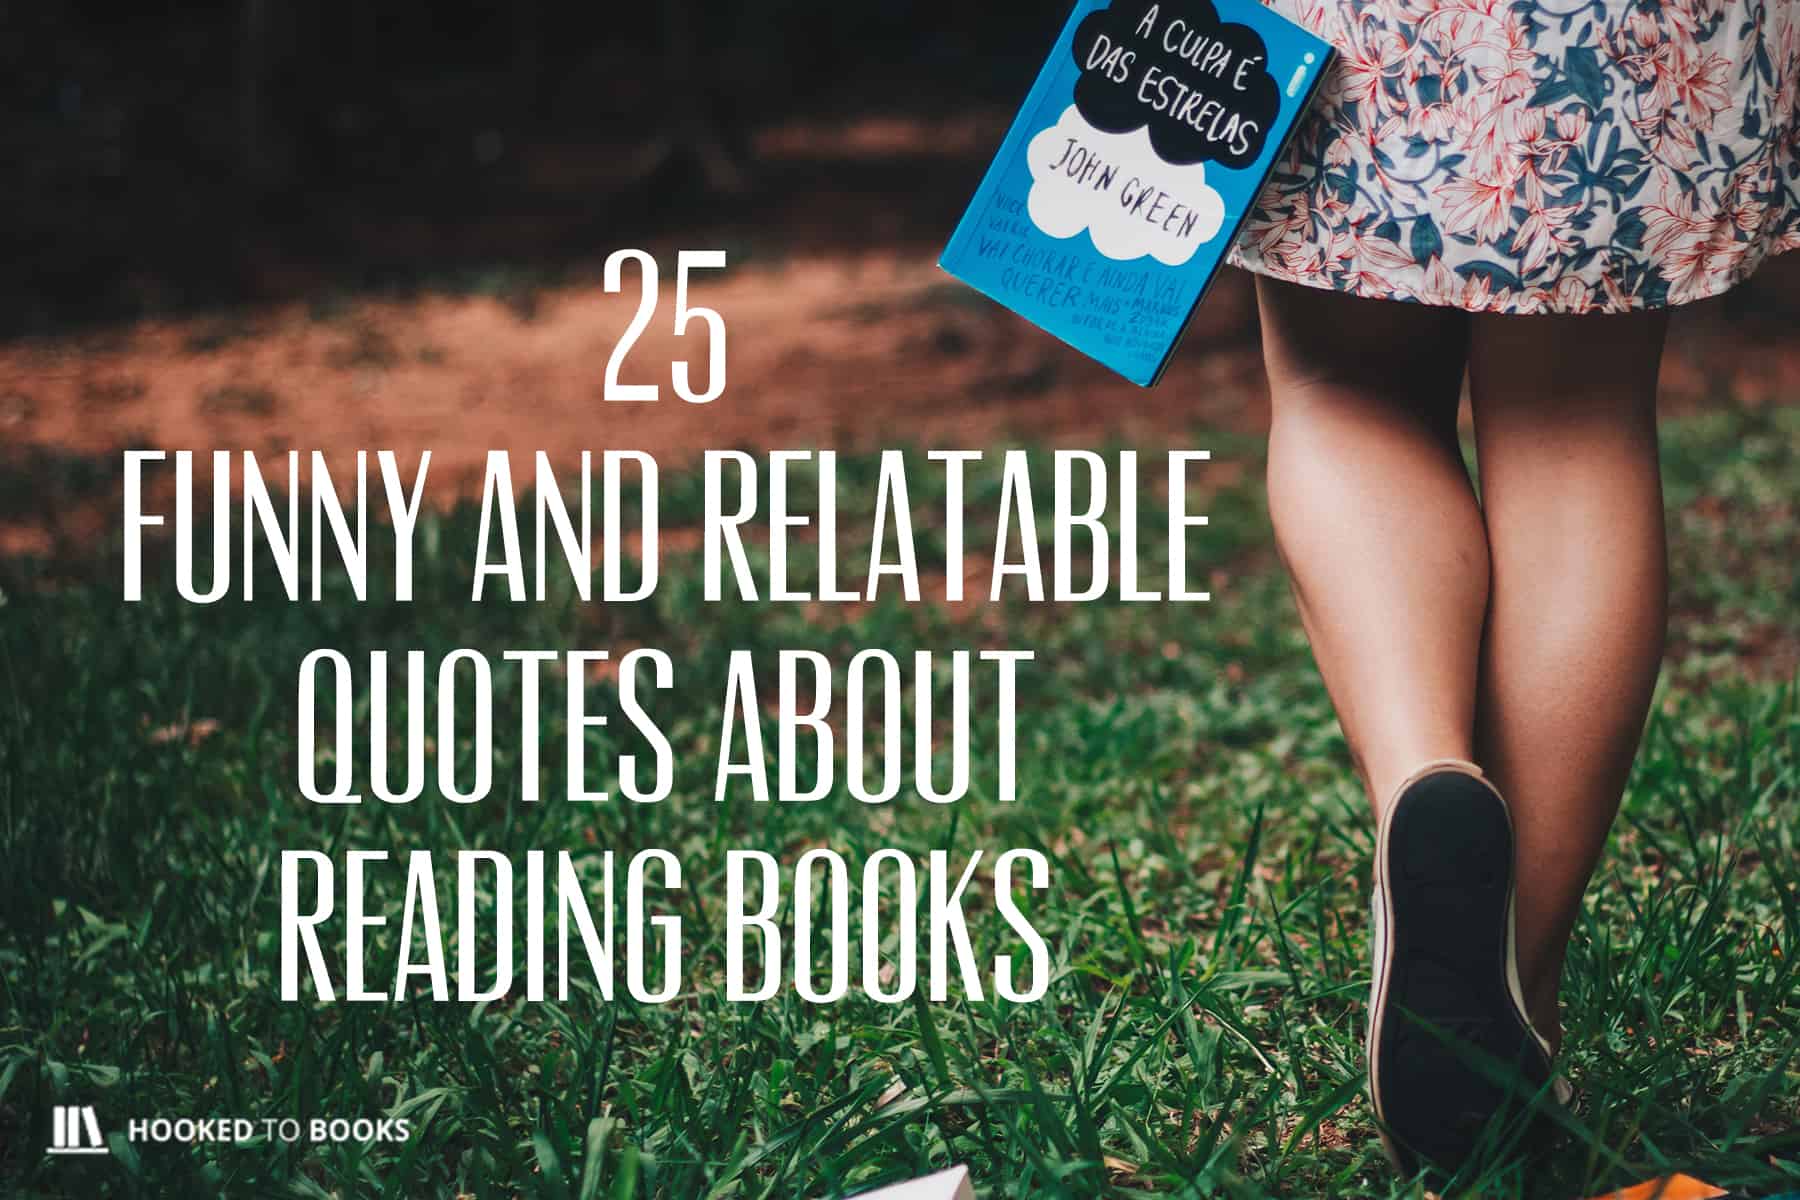 25-funny-and-relatable-quotes-about-reading-books-hooked-to-books